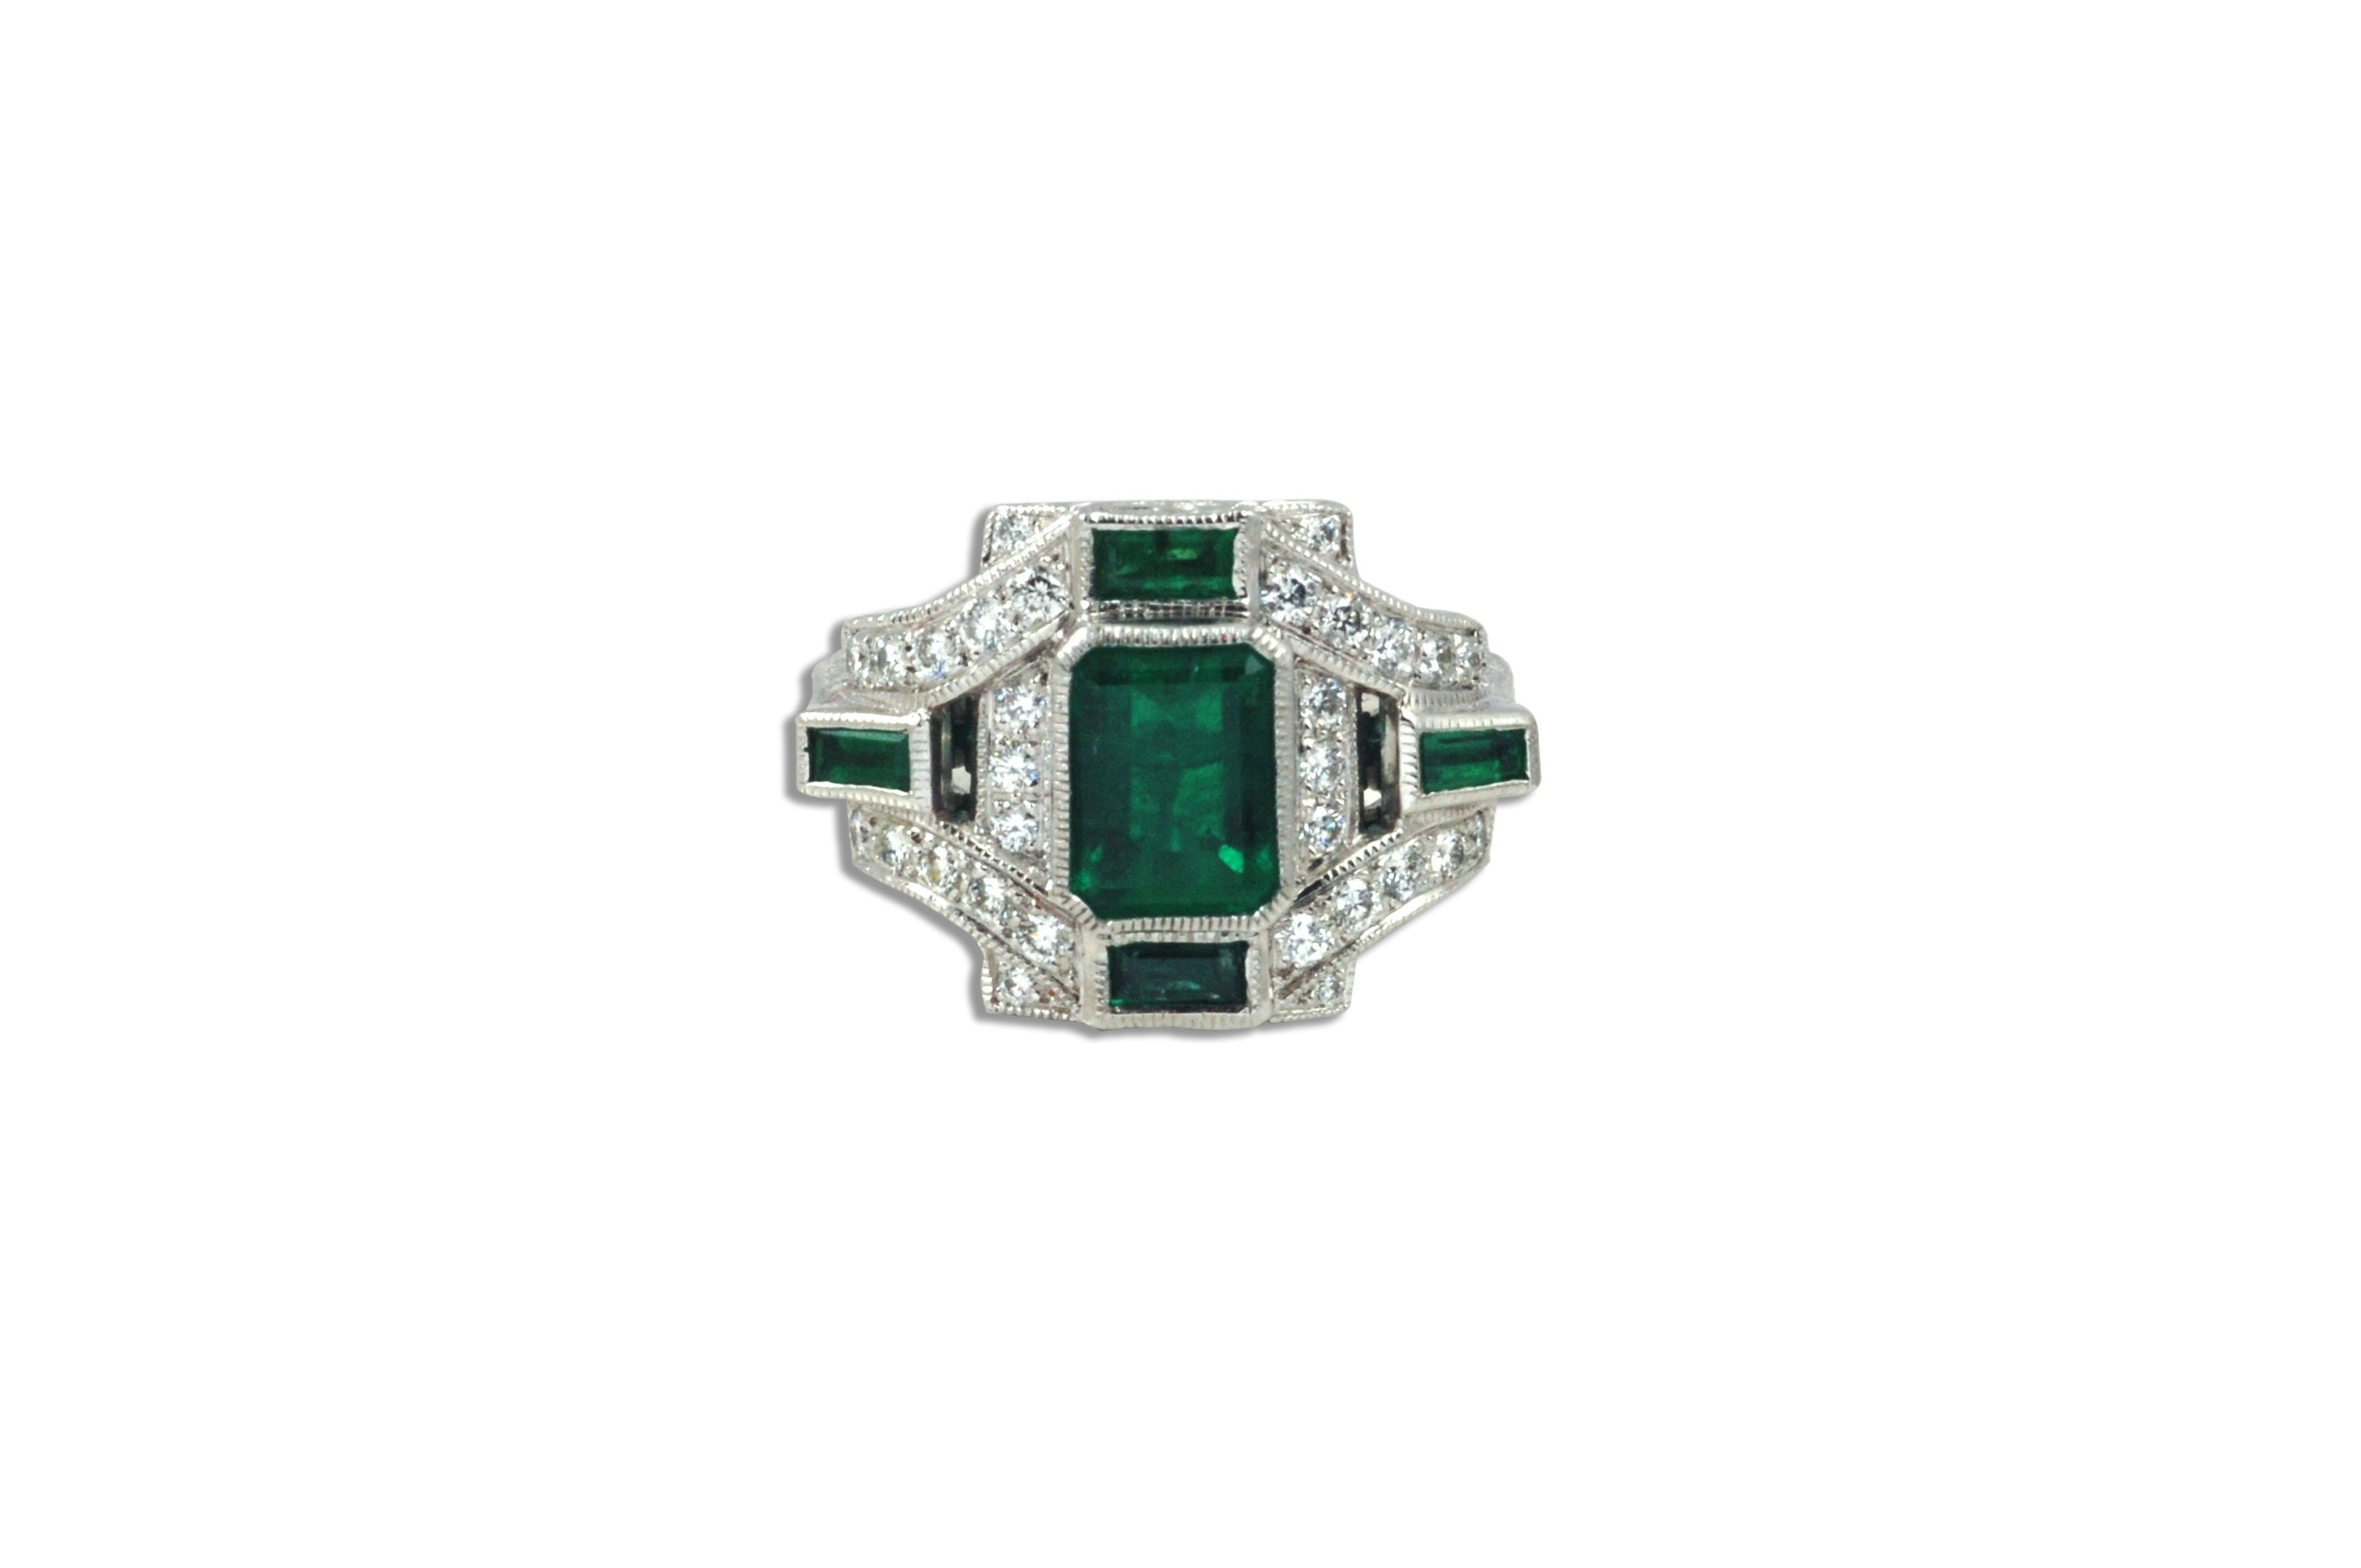 Emerald 1.66 carats, Emerald 0.33 carat with Diamond 0.37 ct Ring in 18 karat White Gold Settings

Width: 2.4 cm
Length: 1.5 cm
Ring Size: 52
Total Weight: 10.06 grams

